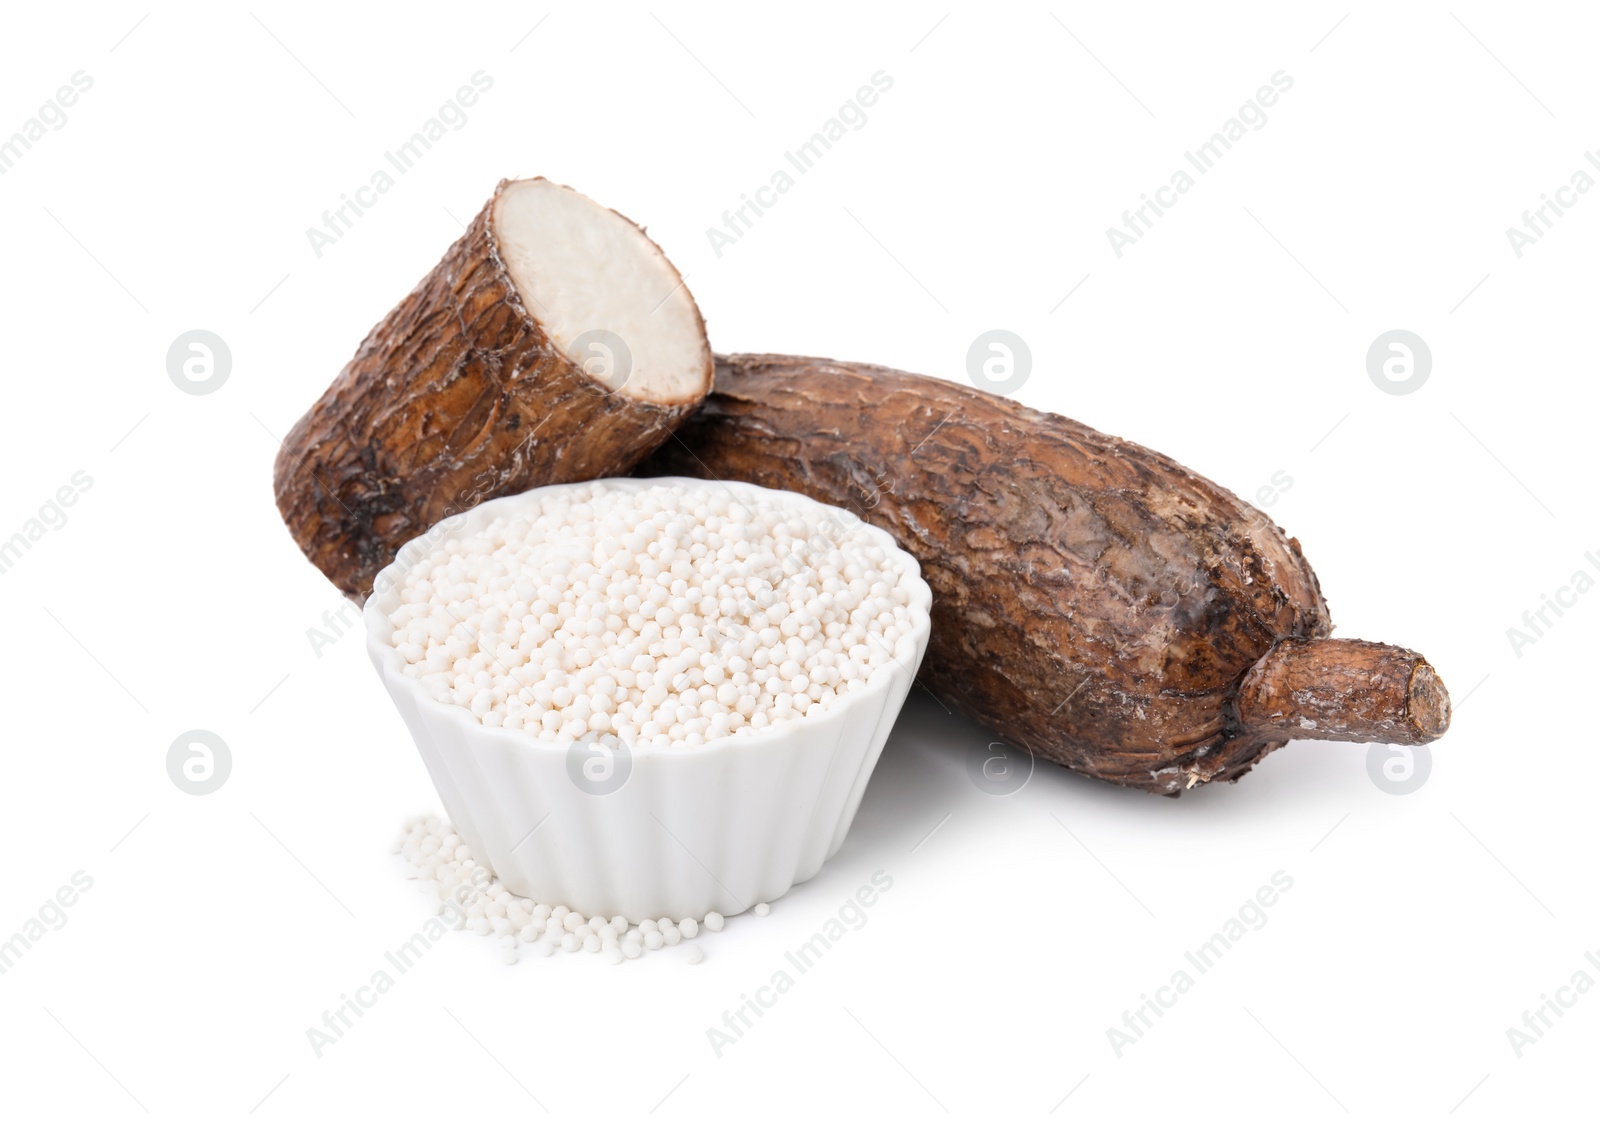 Photo of Tapioca pearls in bowl and cassava roots isolated on white